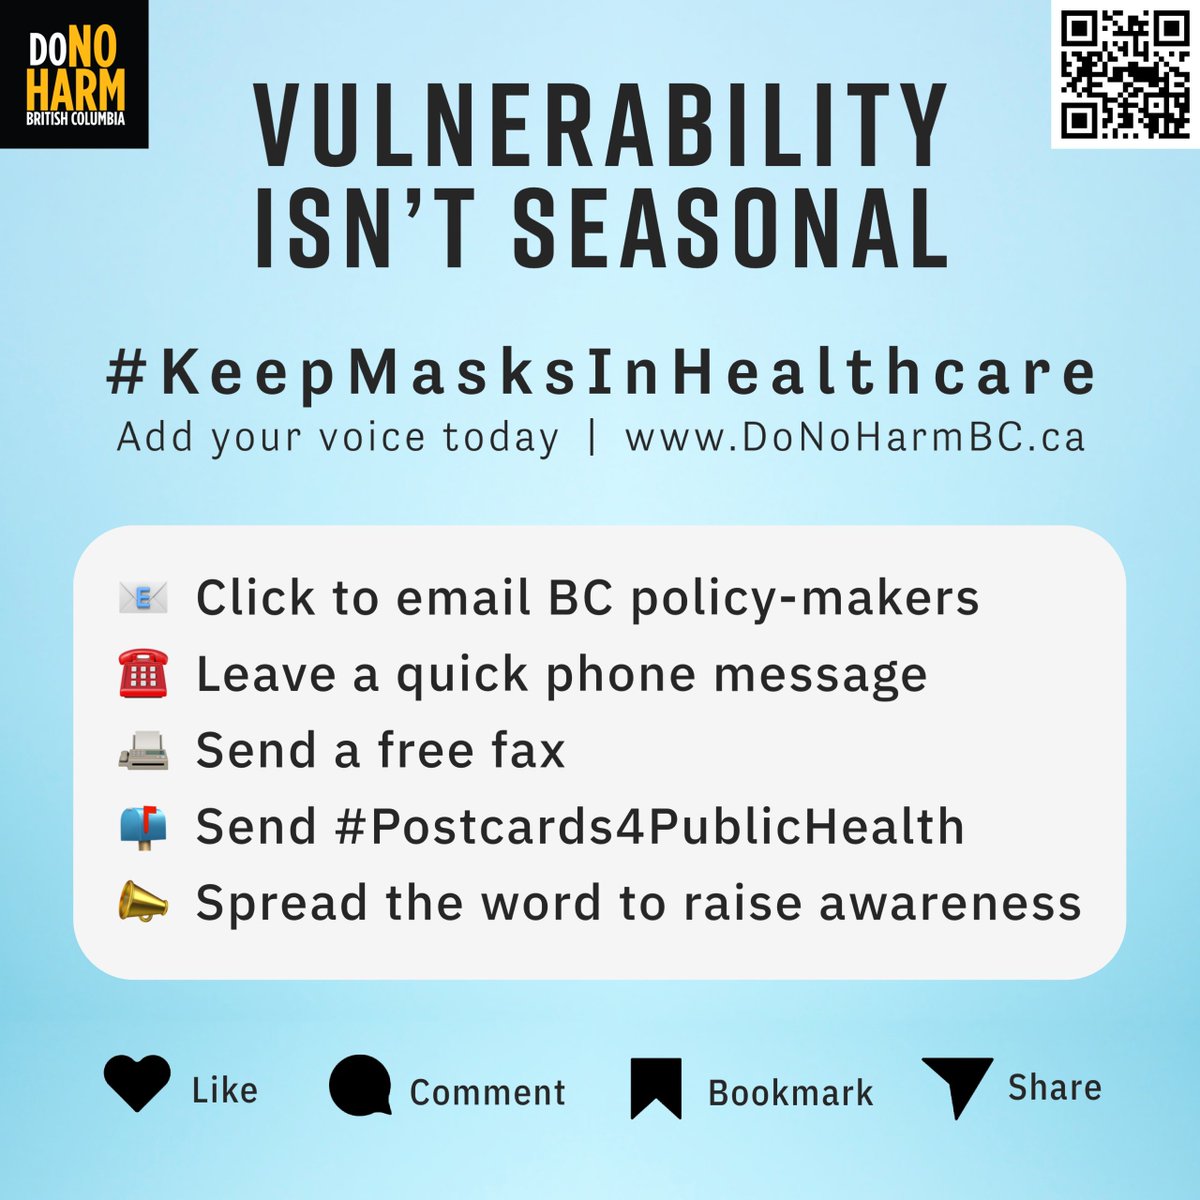 Thank you friends! So far, you have sent 16,556 emails telling BC policymakers #VulnerabilityIsntSeasonal & demanding they #KeepMasksInHealthcare! And we're not done! You can ☎️CALL, 📠FAX, & ✉️MAIL to keep up the pressure! Each only takes a few minutes. donoharmbc.ca/vulnerability-…